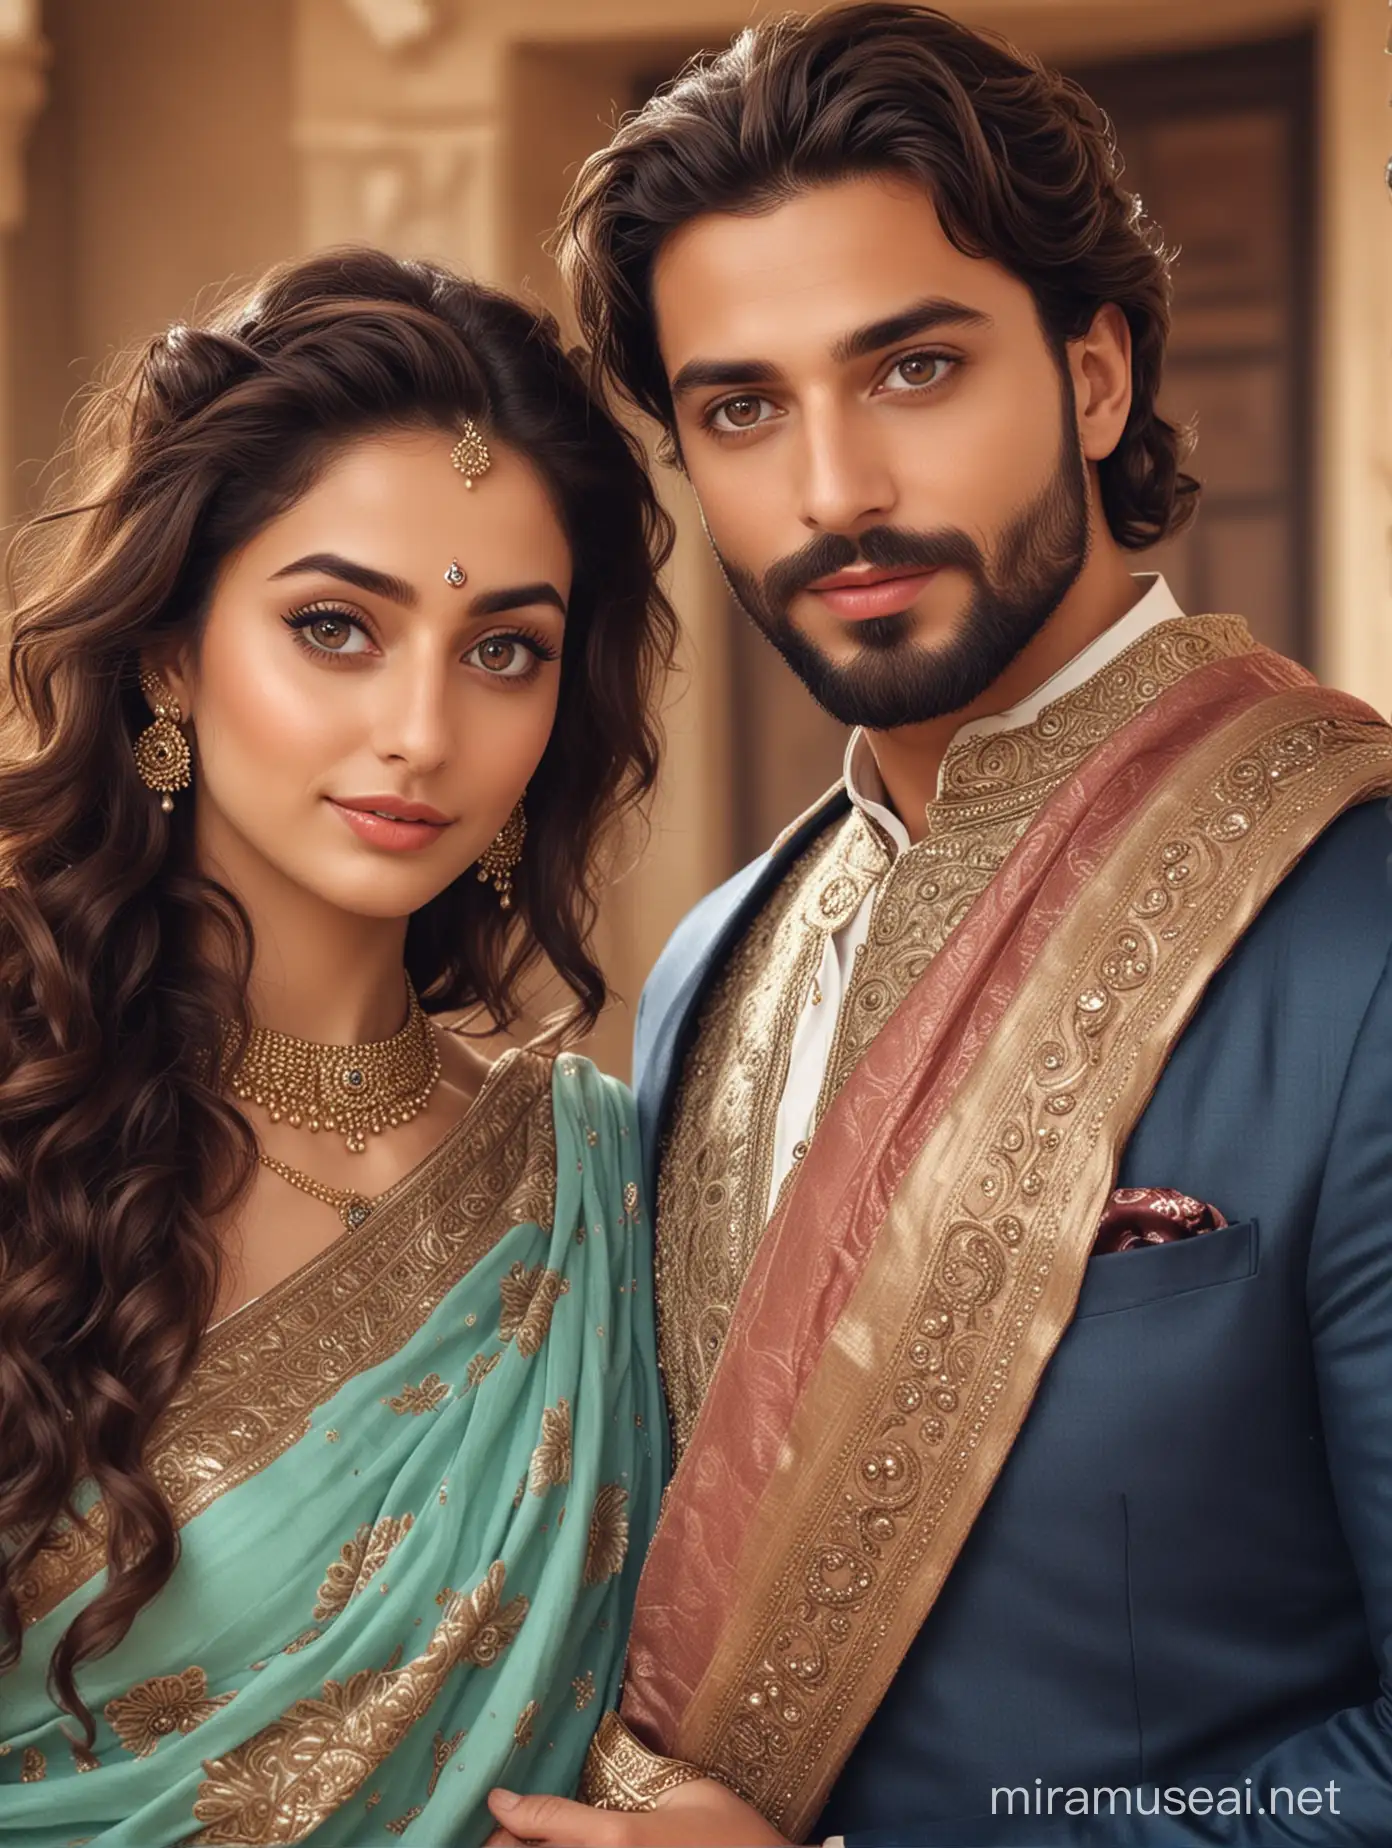 full photo of most beautiful european couple as most beautiful indian couple, most beautiful girl in elegant saree and long curly hairs, big wide eyes, full face, makeup, man with stylish beard, man perfect hair cut, formals, photo realistic, 4k.